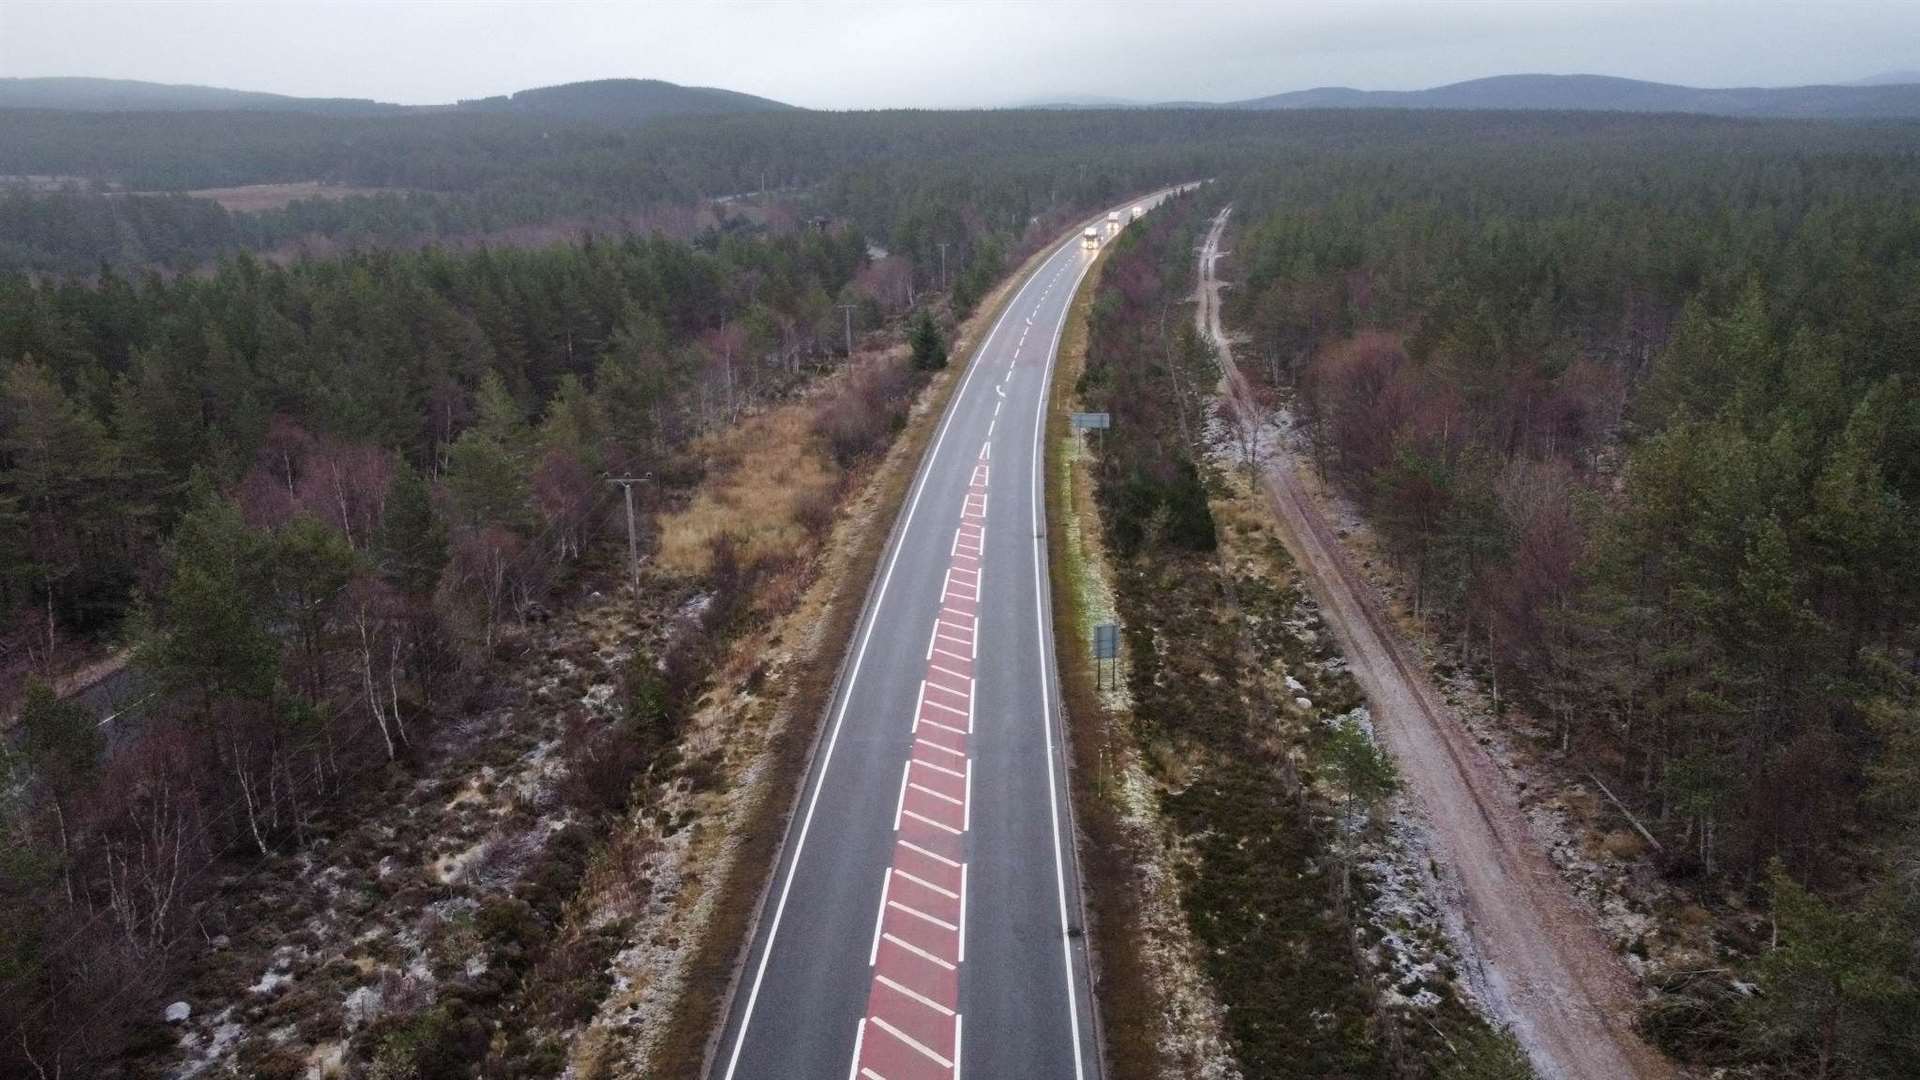 Room for improvement: the A9 needs dualling now, say campaigners. Picture: Sandrone